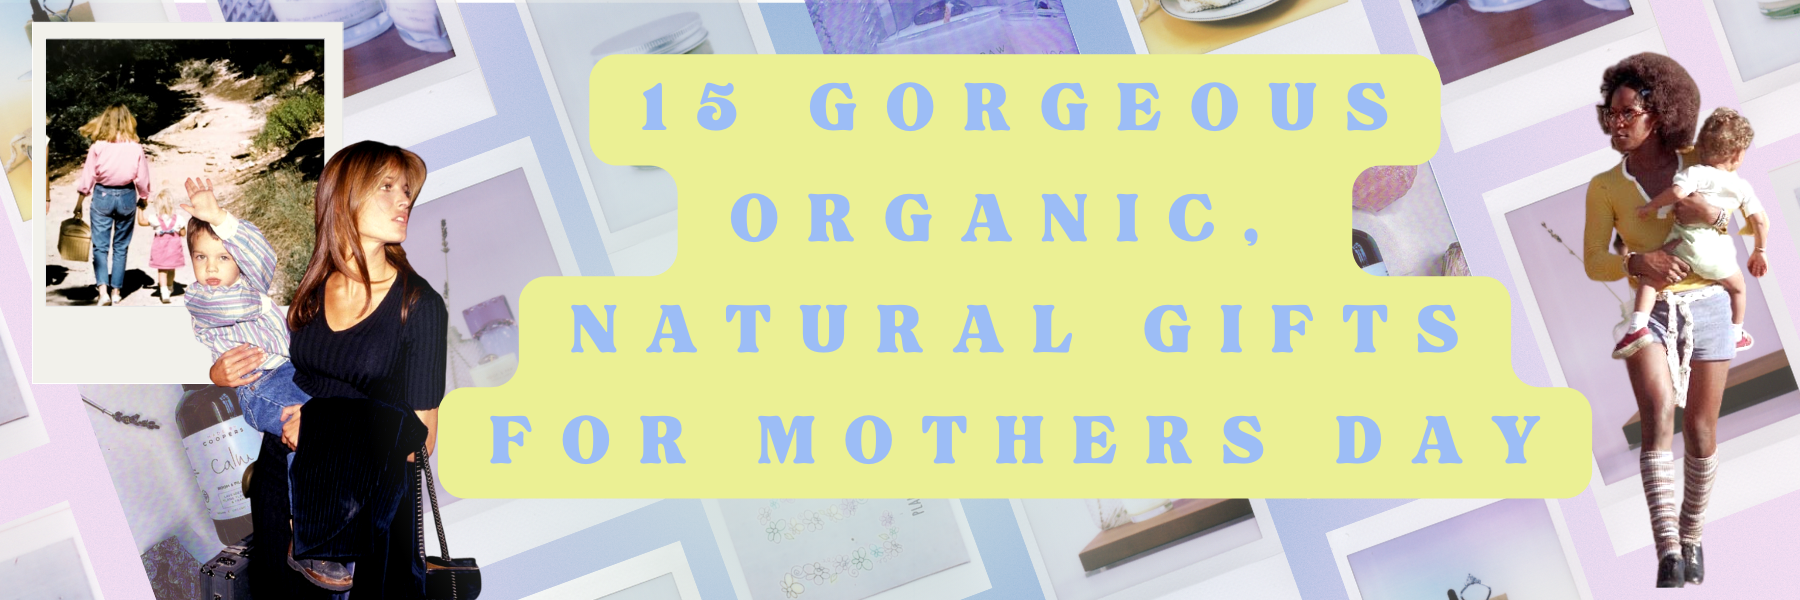 polaroids of natural products sold on organics.com with images on 90's mums